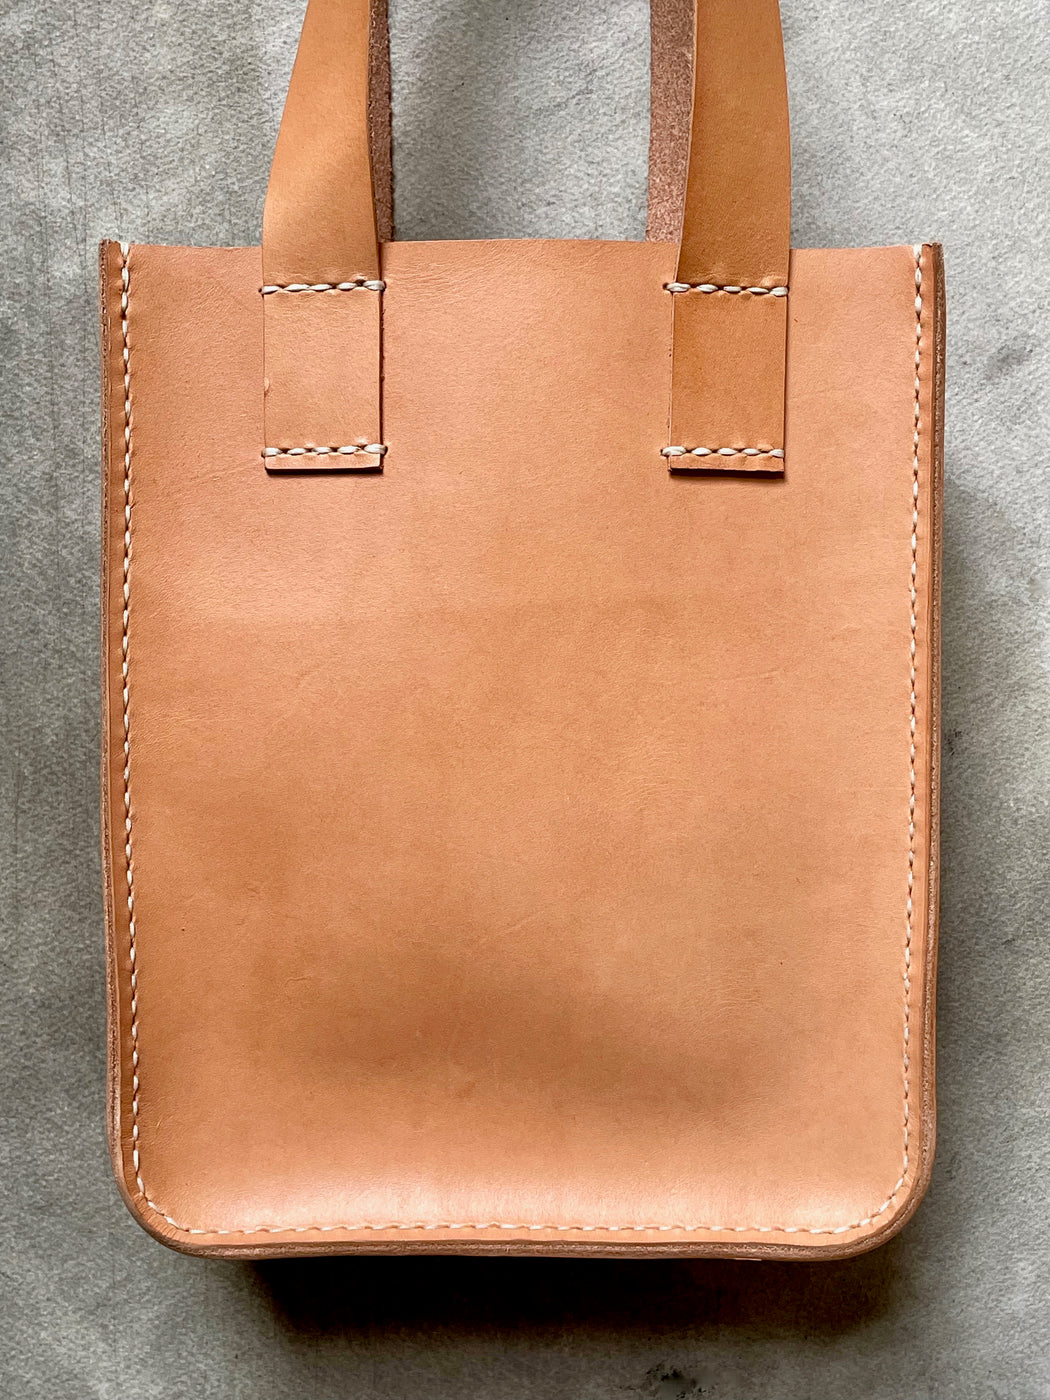 Natural Leather Tote by Made Solid